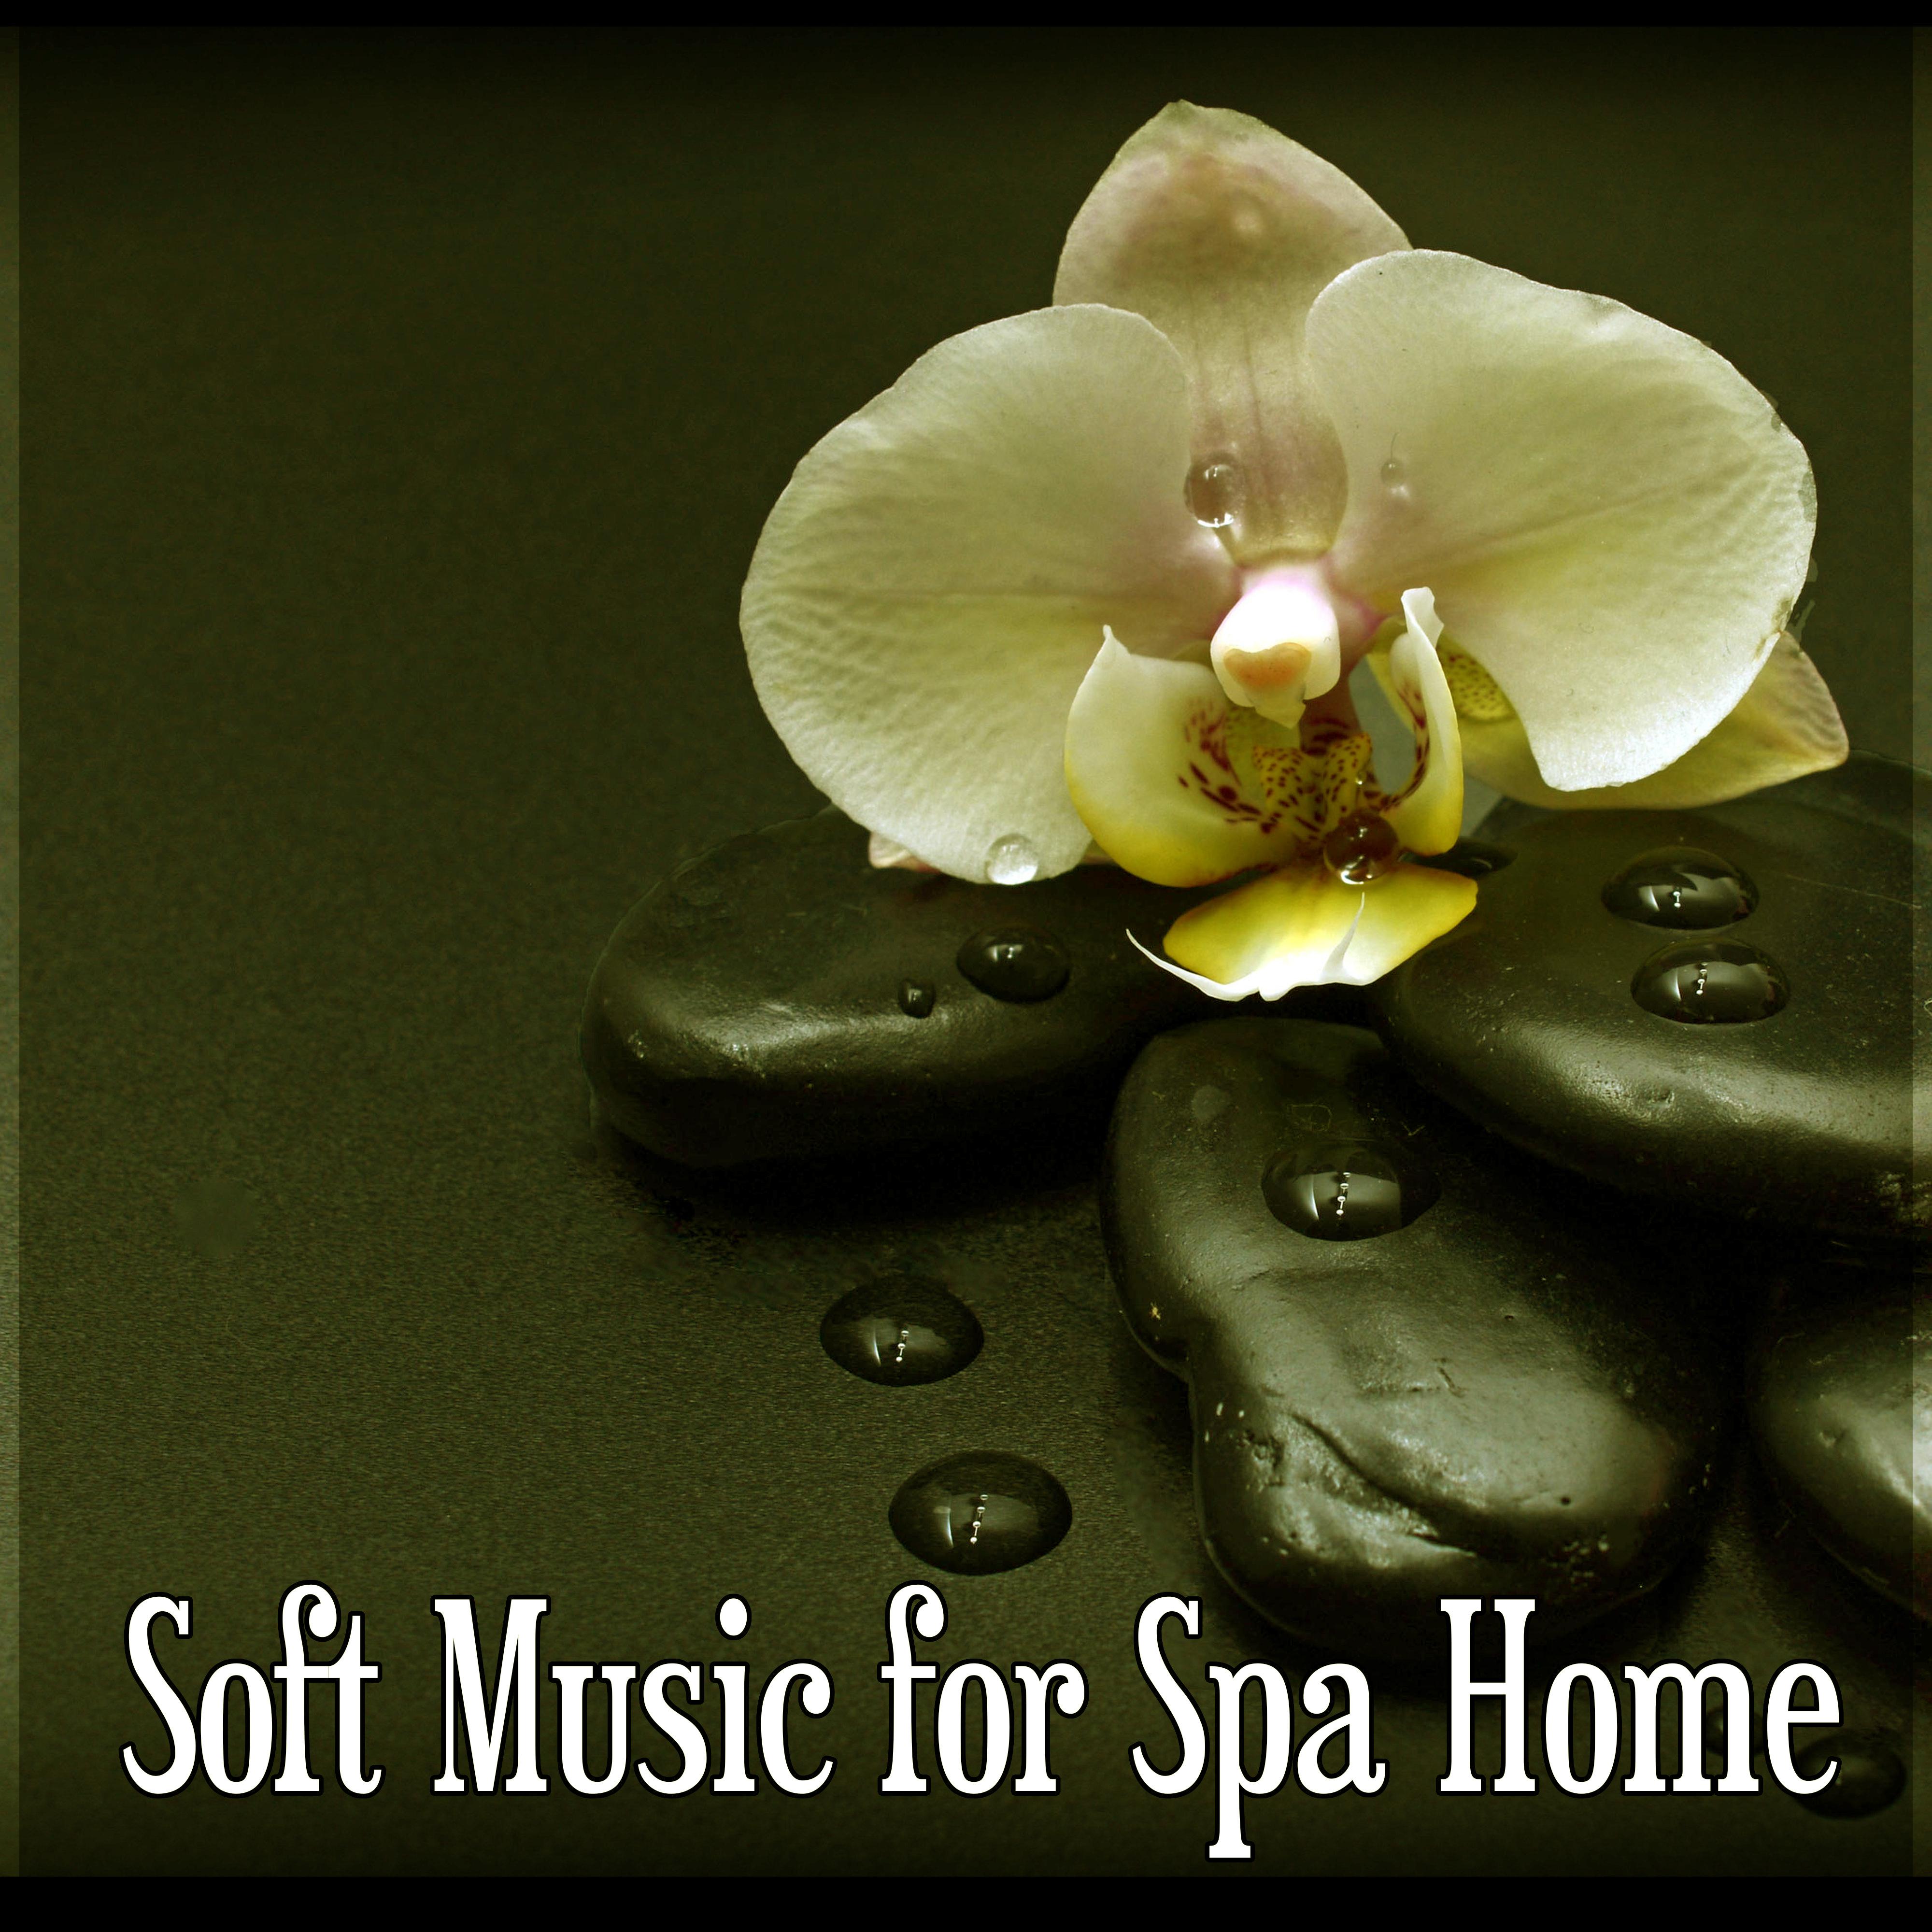 Soft Music for Spa Home  Calm Music for Massage, Healing Touch, Background Music for Relaxation, Deep Sounds for Meditation